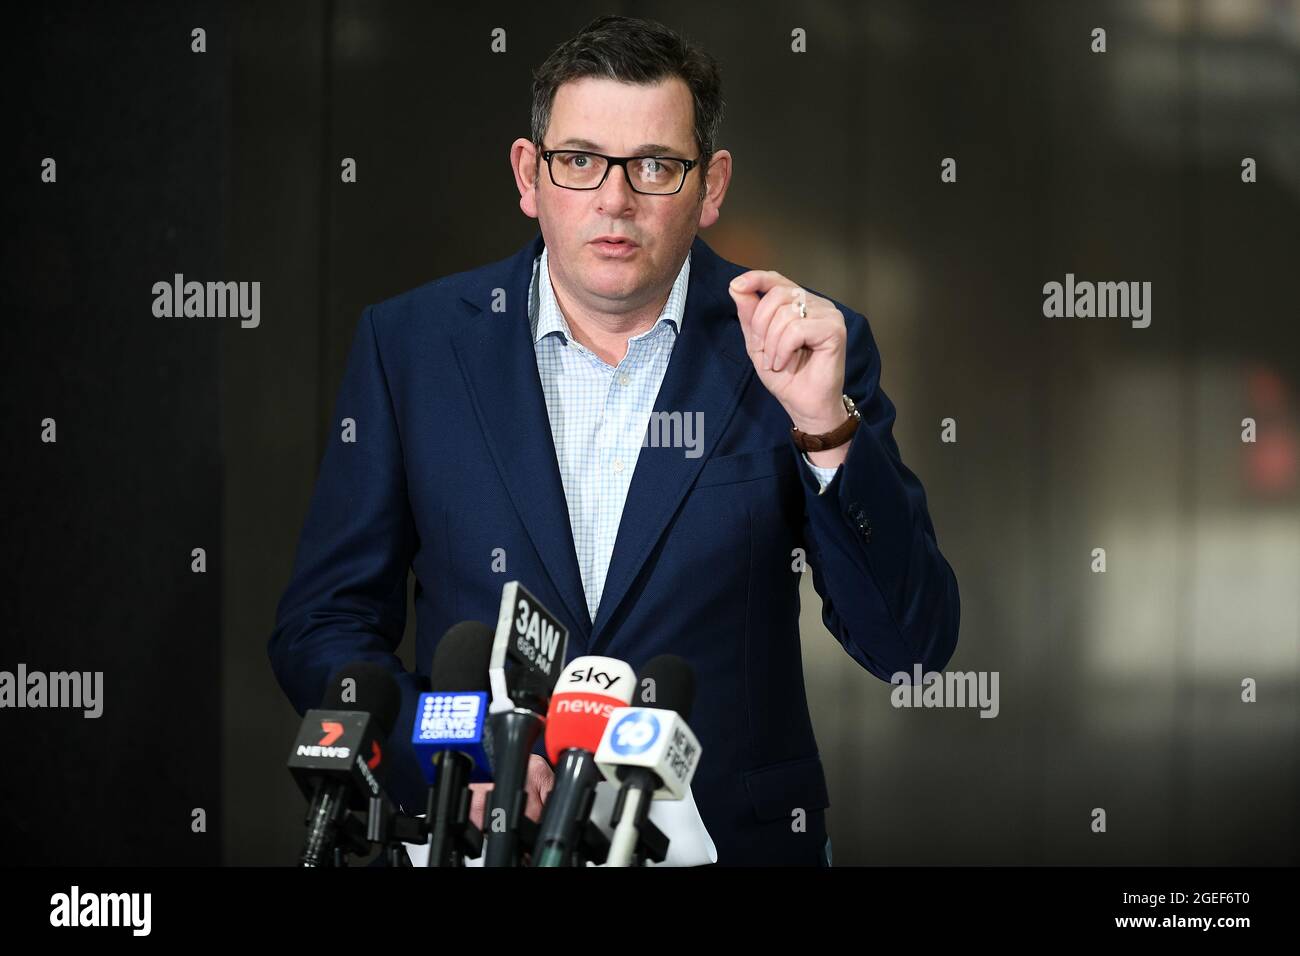 Melbourne, Australia. 20th Aug, 2021. State Premier Daniel Andrews speaks passionately during a press conference where it was announced by the Premier Daniel Andrews that Victoria is on a tipping point and risk the virus getting away from under the sixth lockdown in the State of Victoria. Credit: Michael Currie/Speed Media/Alamy Live News Stock Photo